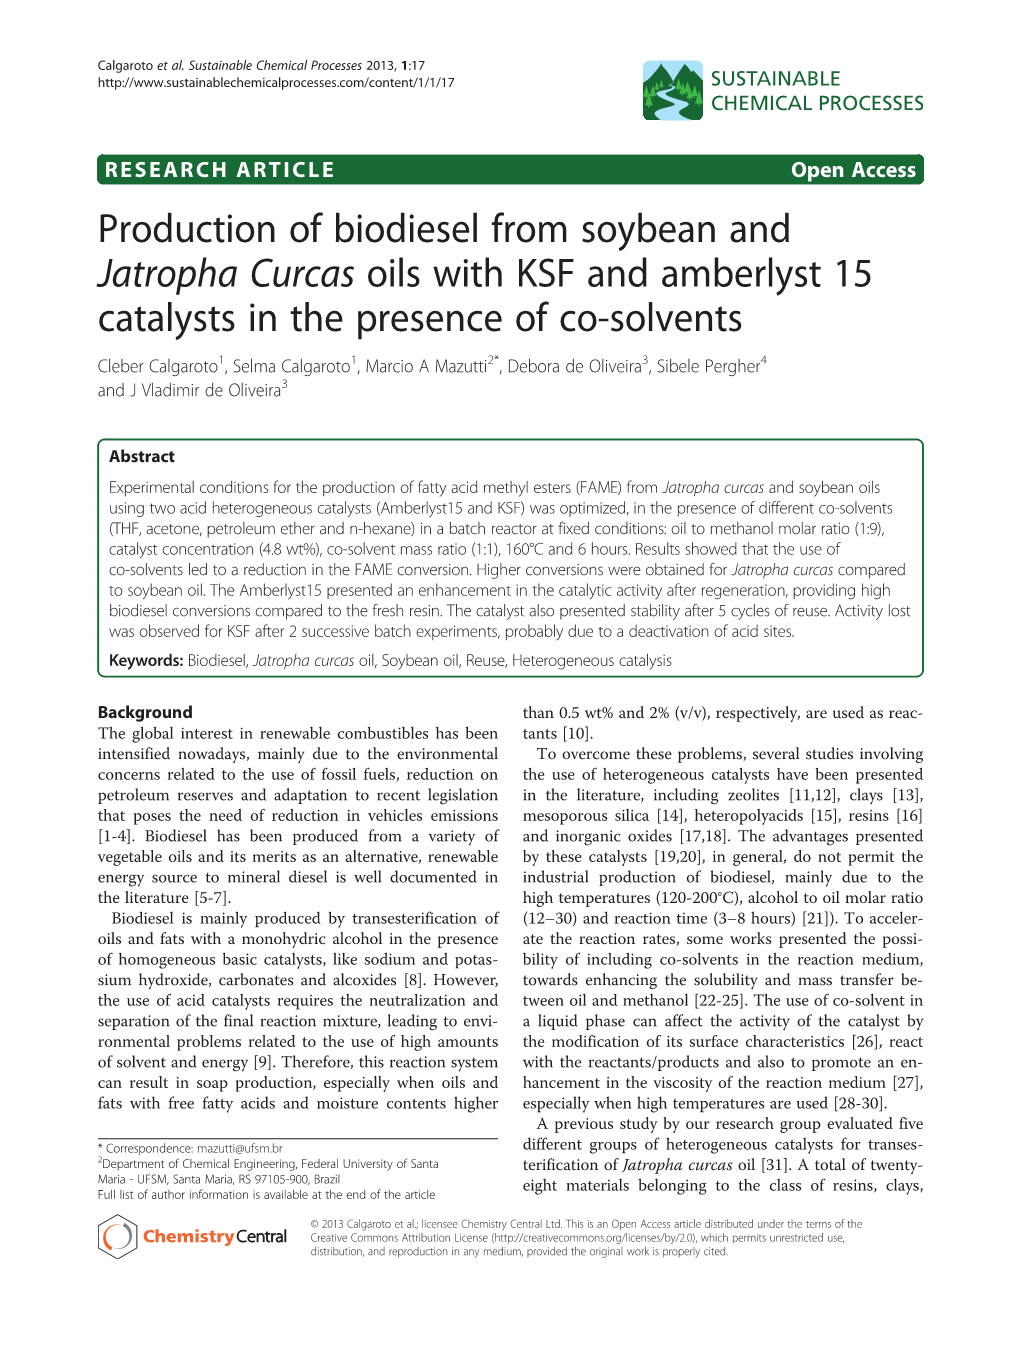 Production of Biodiesel from Soybean and Jatropha Curcas Oils with KSF